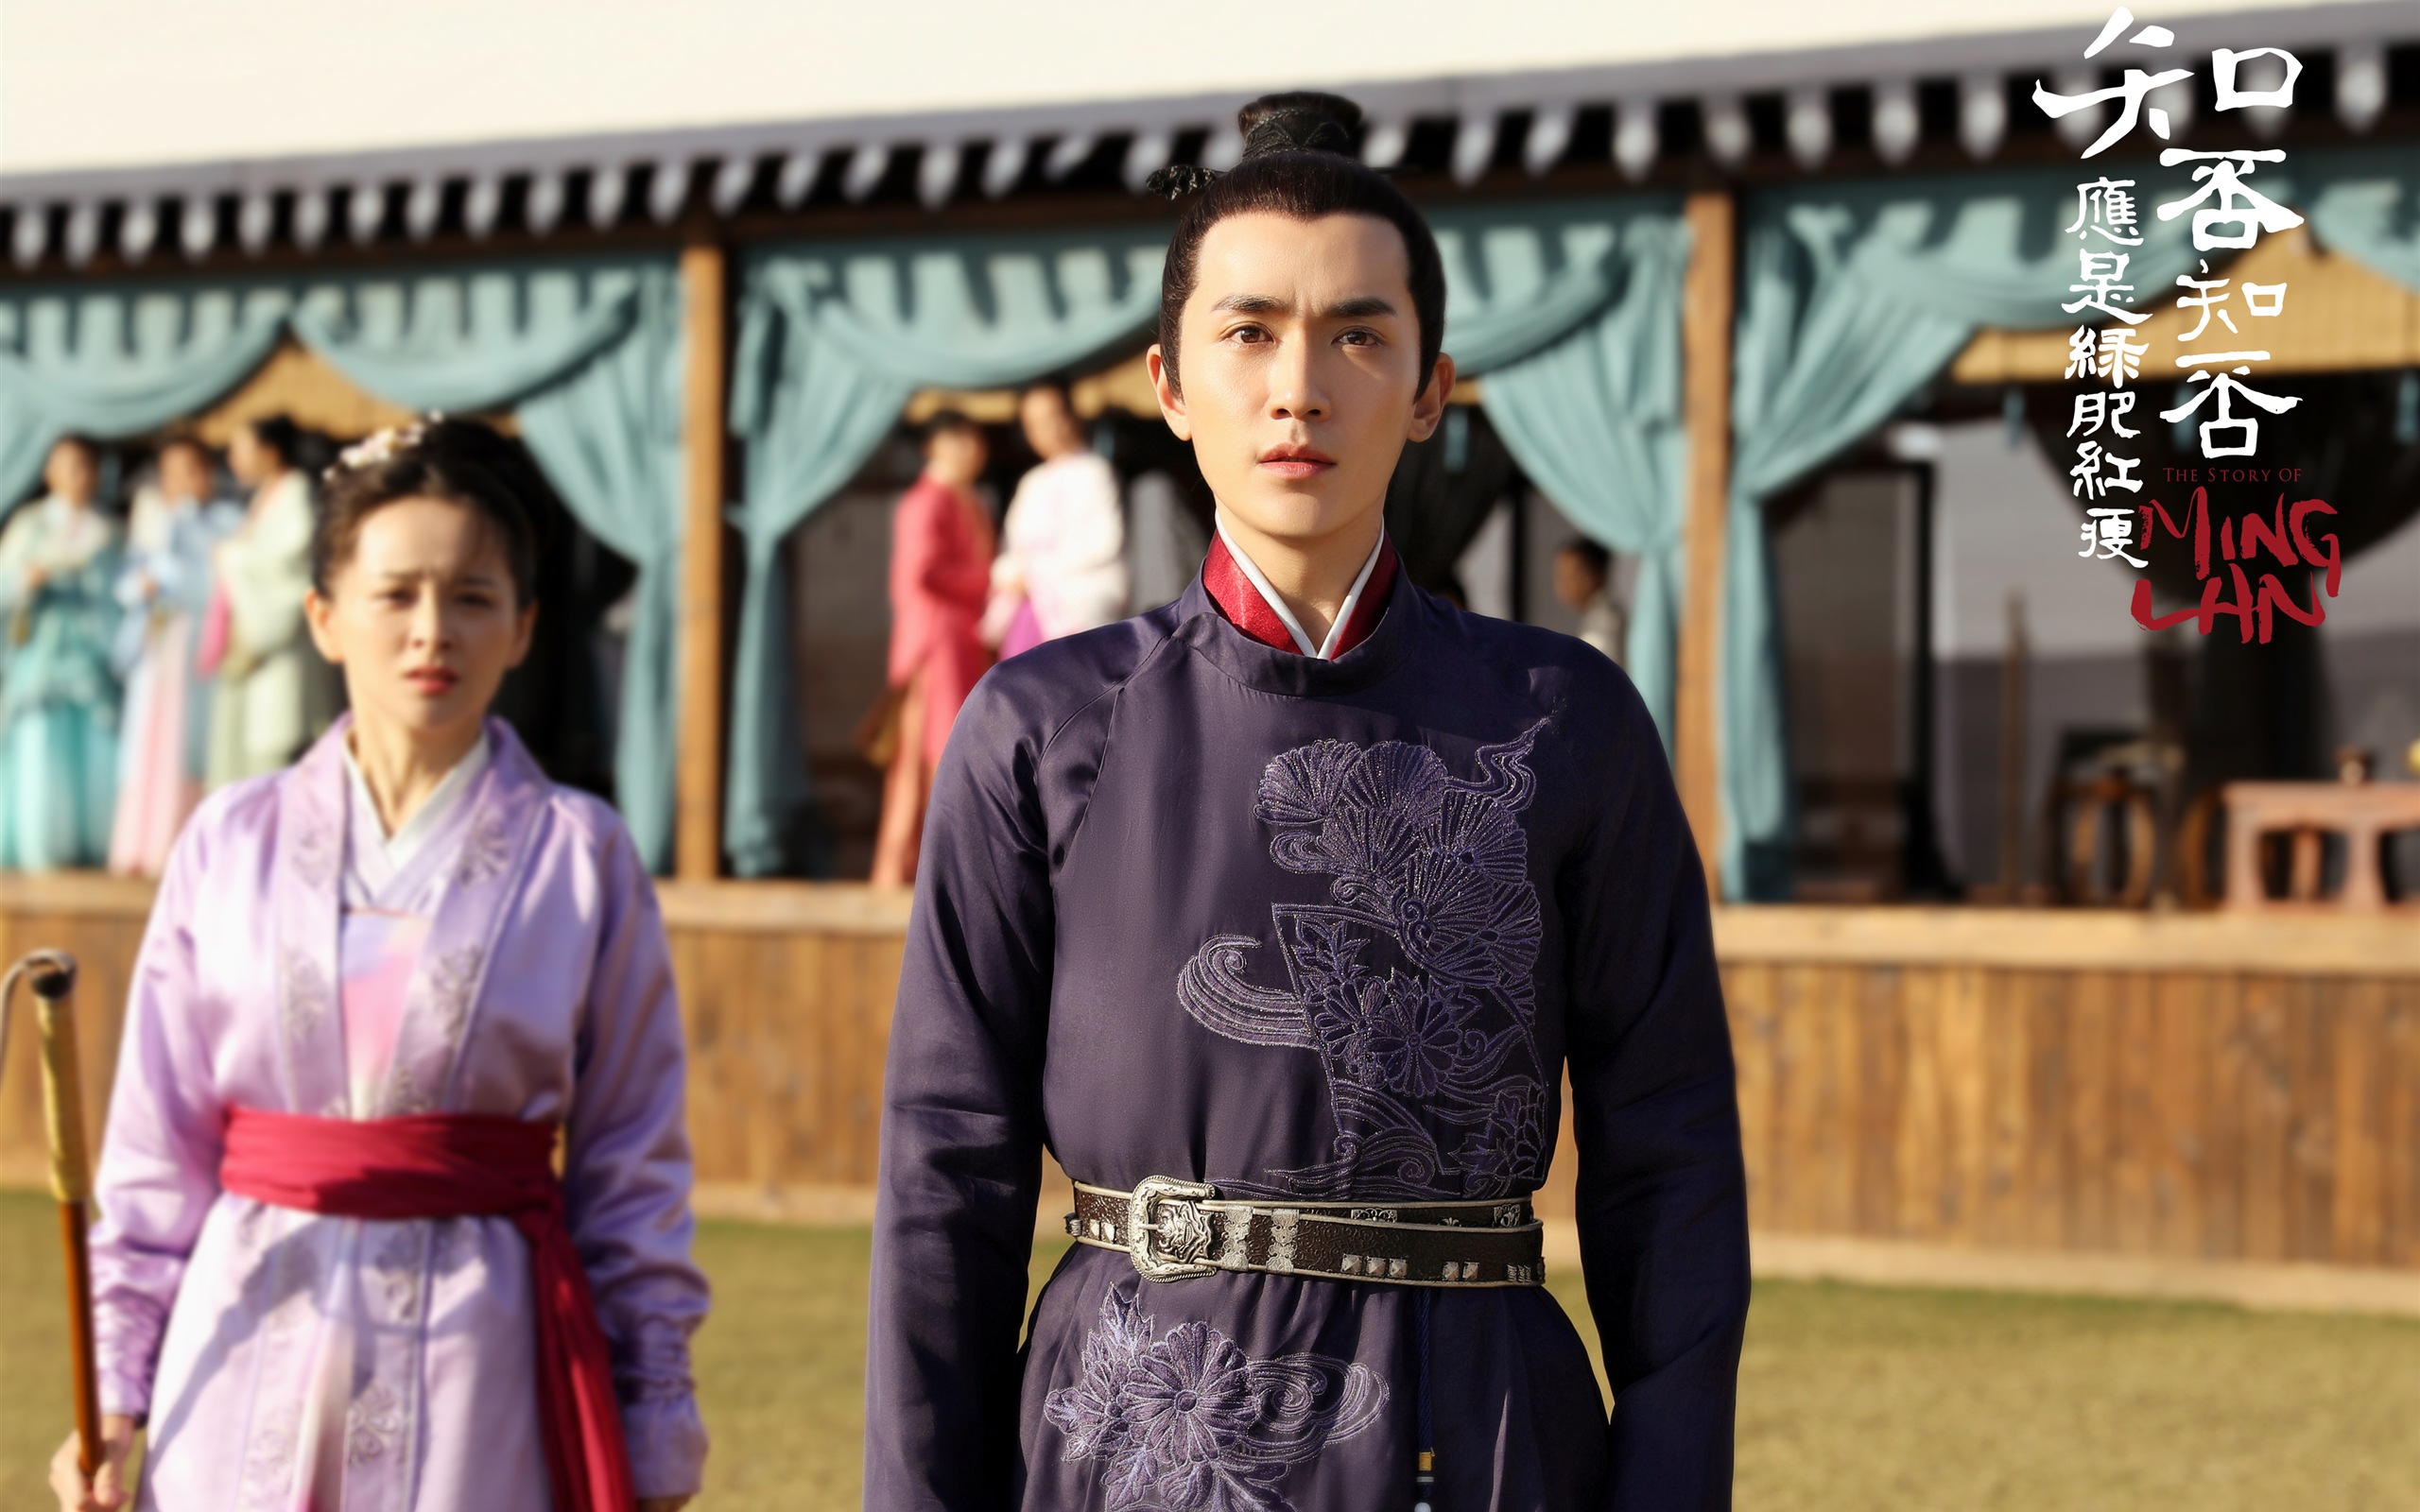 The Story Of MingLan, TV series HD wallpapers #38 - 2560x1600